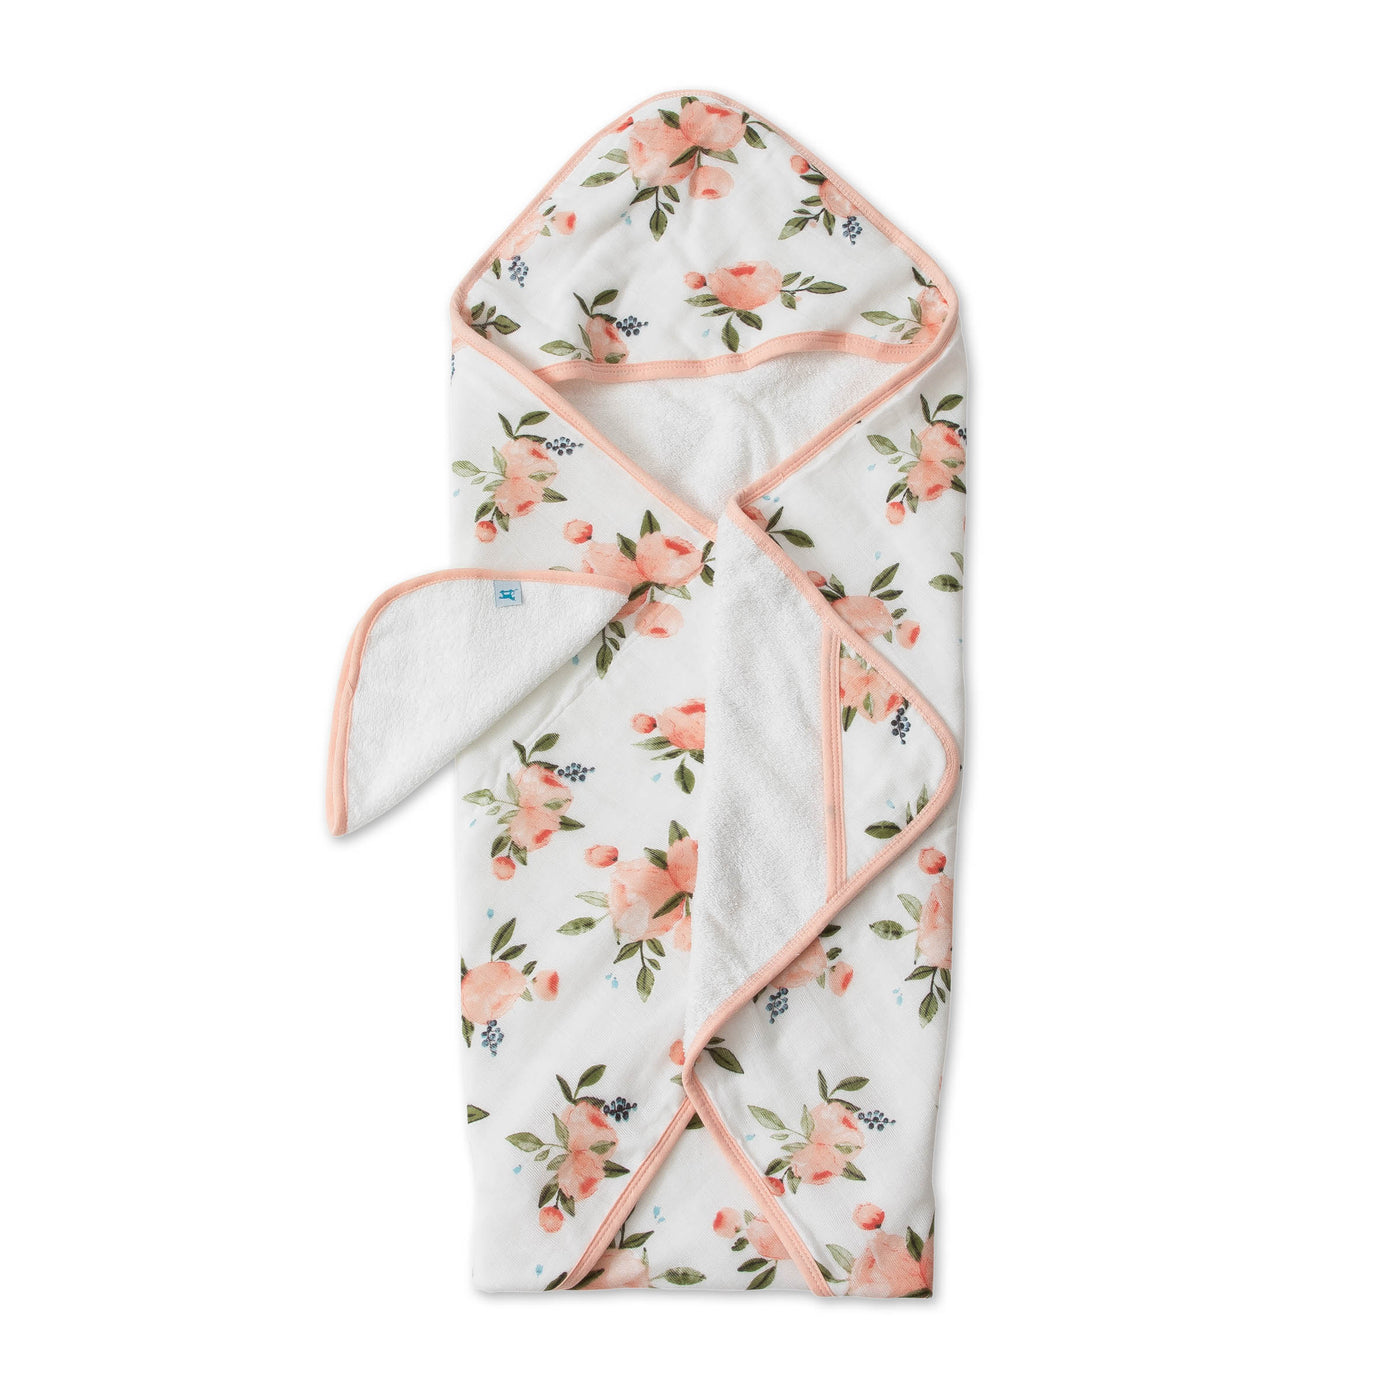 Hooded Towel & Wash Cloth - Watercolour Roses